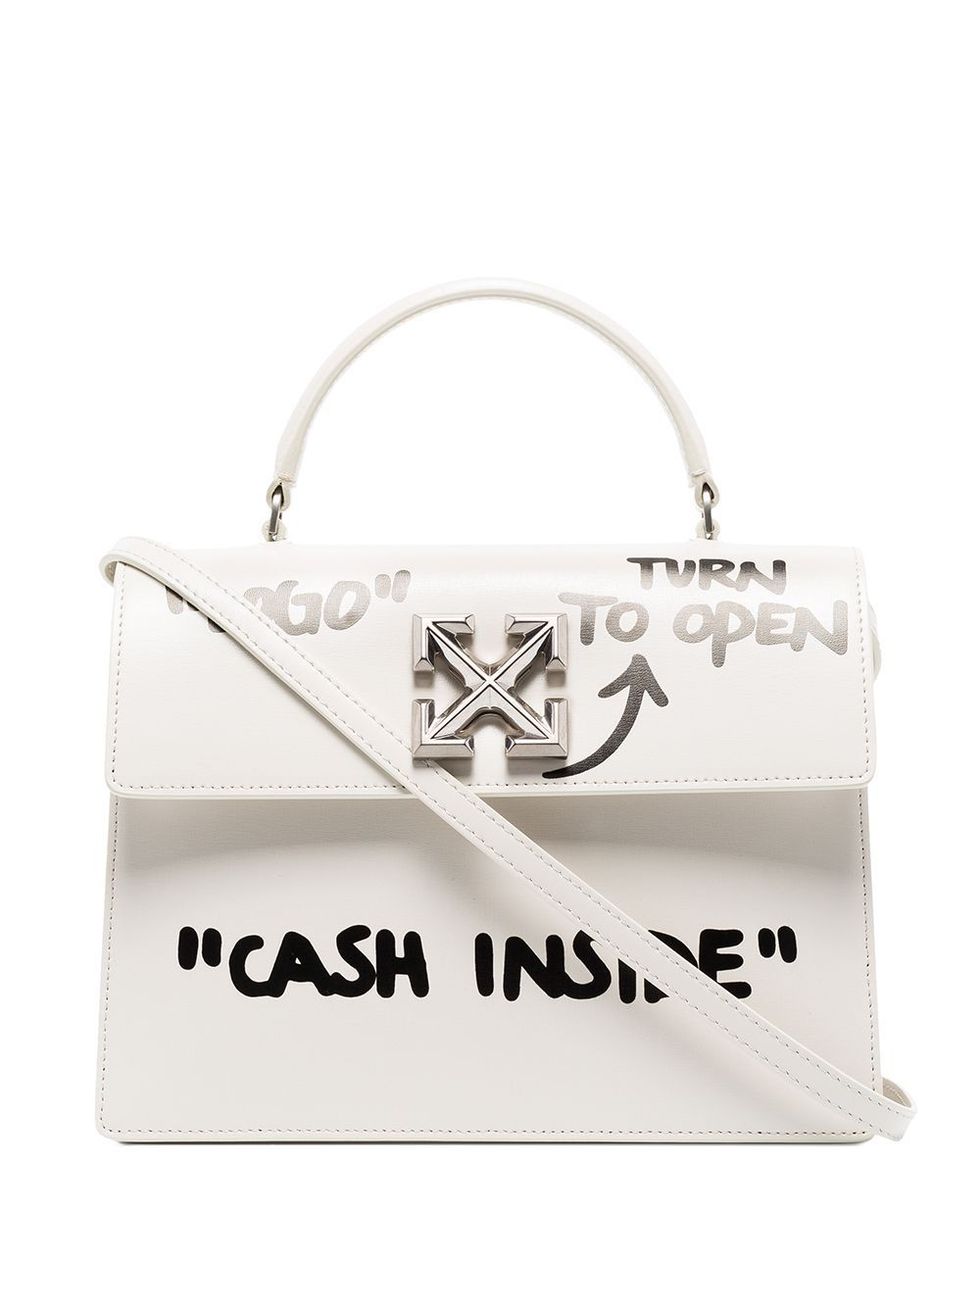 Virgil Abloh's Off-White fashion brand unveils an 'unfunctional' handbag  with HOLES